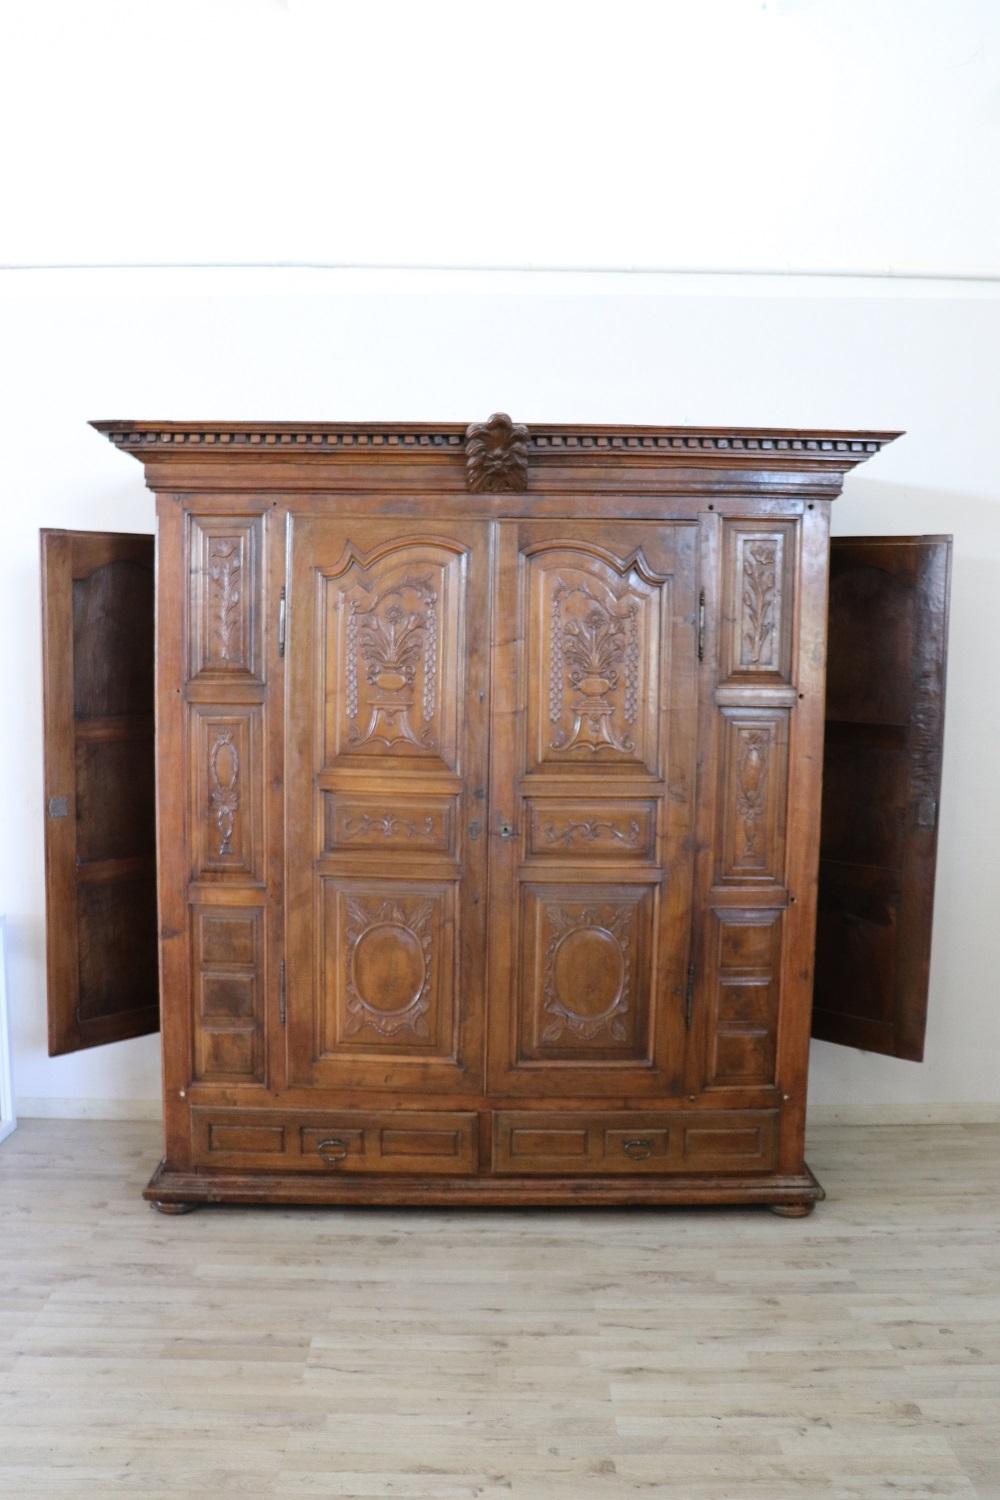 Italian Early 18th Century Baroque Carved Walnut Antique Wardrobe, Cabinet with Secrets